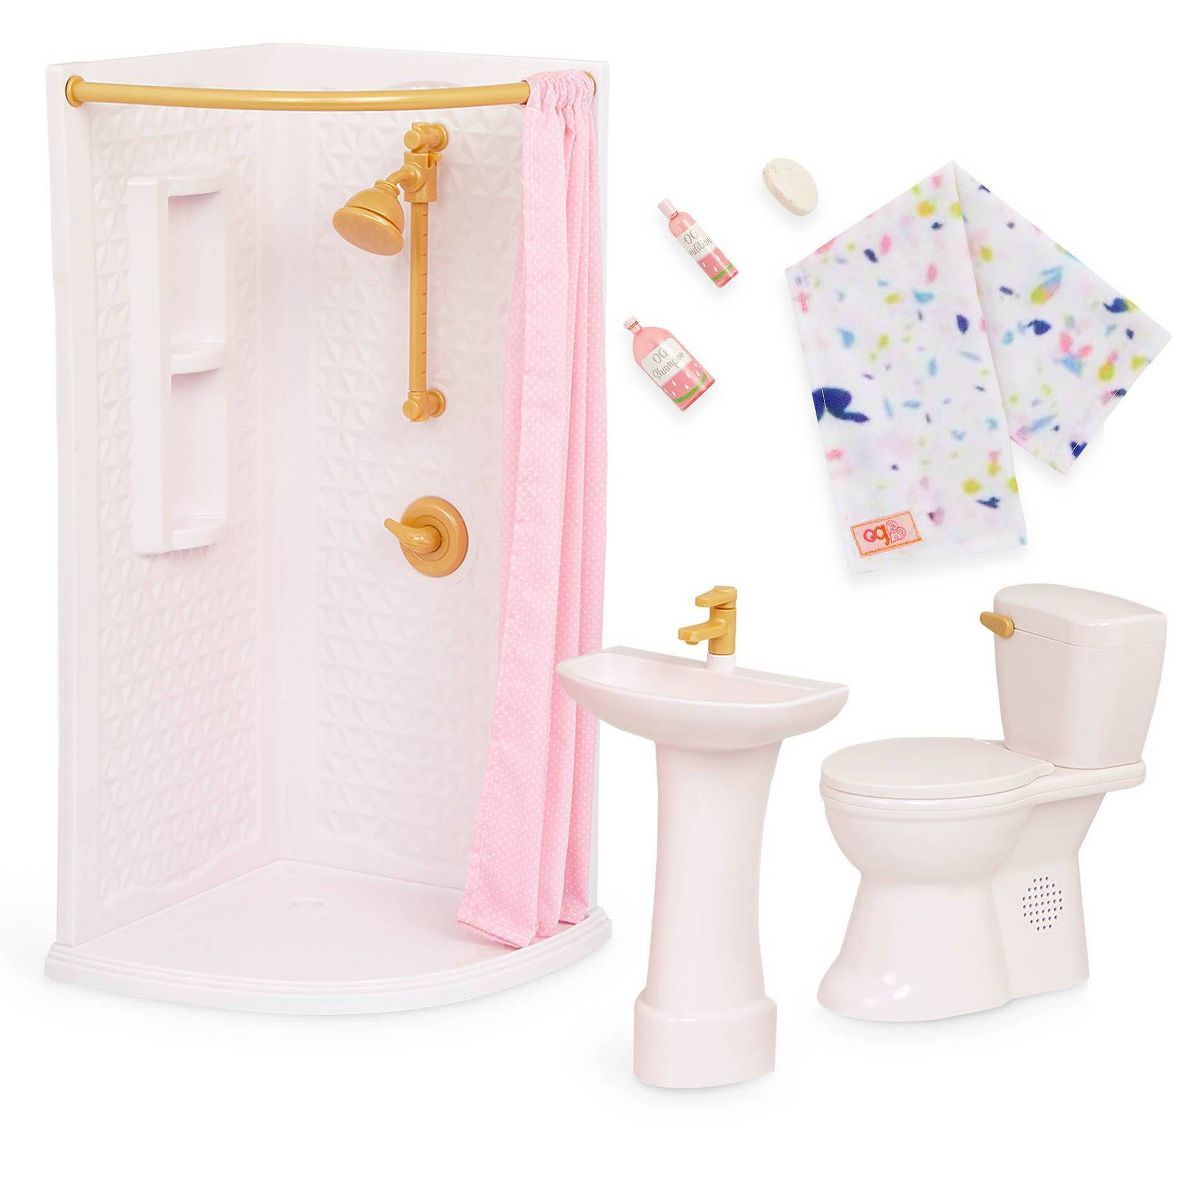 Our Generation Sweet Bathroom Accessory Set for 18" Dolls | Target